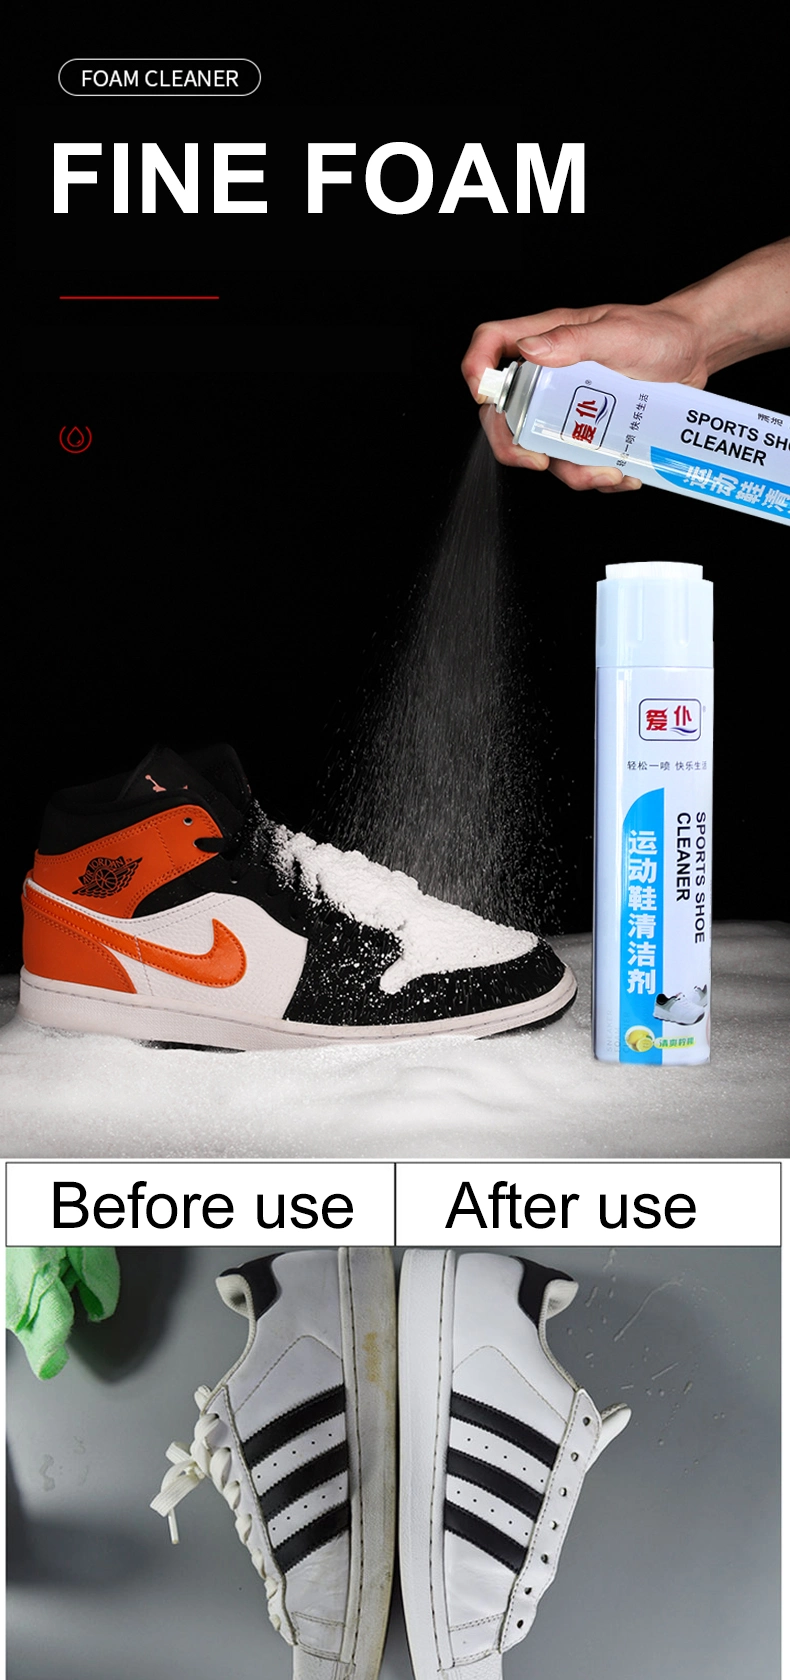 Shoes and Sneaker Foam Cleaner